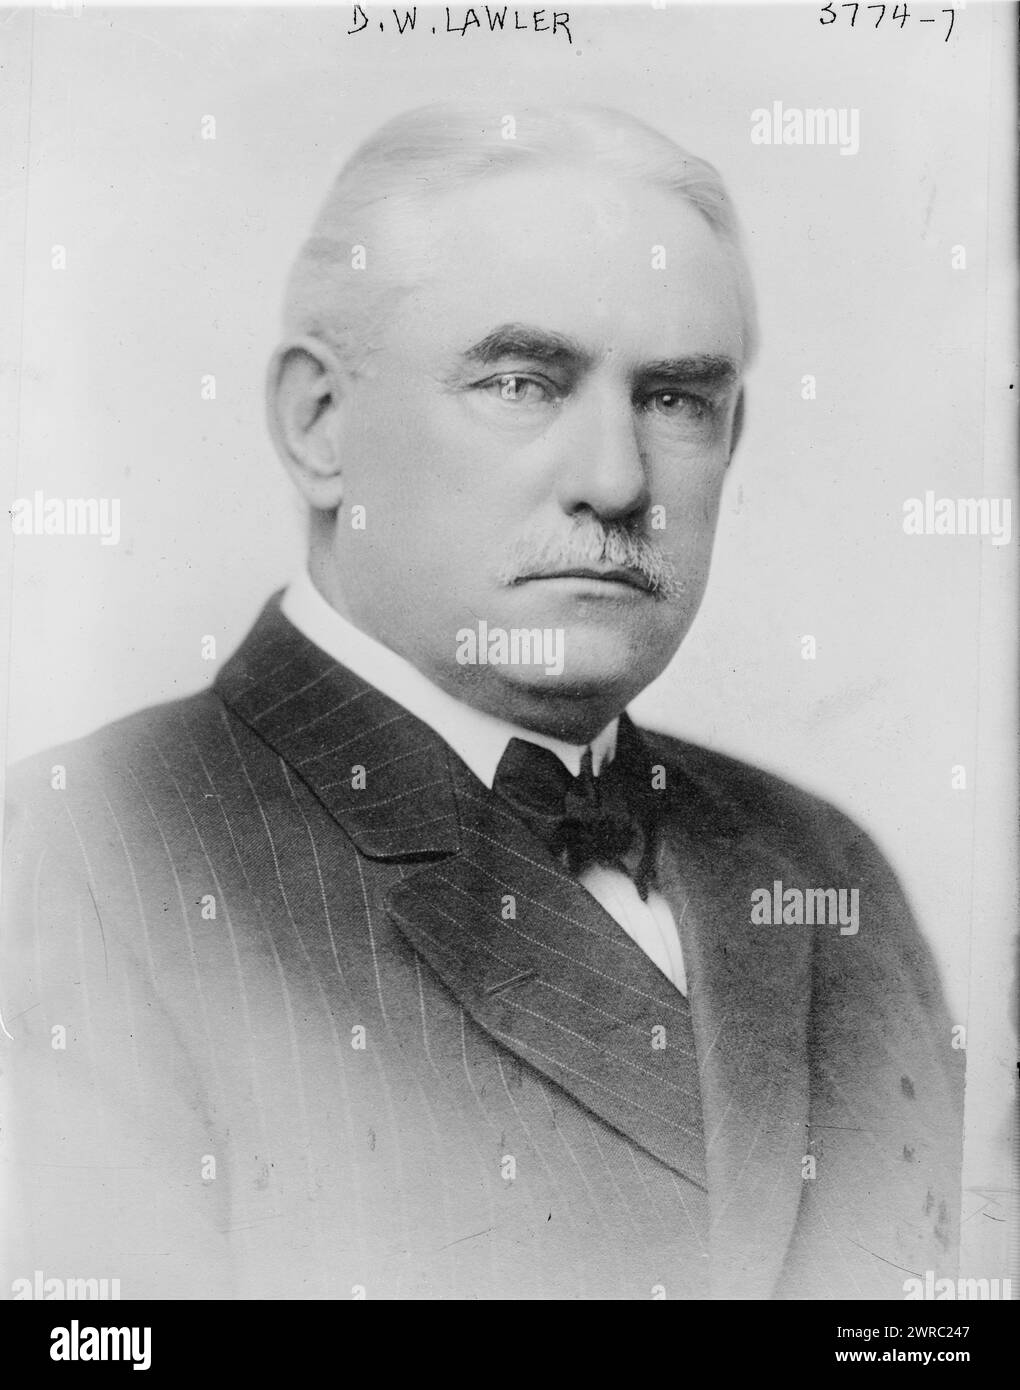 D.W. Lawler, Photograph shows Daniel William Lawler (1859-1926) who served as Mayor of Saint Paul, Minnesota and ran for Senate in 1916., between ca. 1915 and ca. 1920, Glass negatives, 1 negative: glass Stock Photo